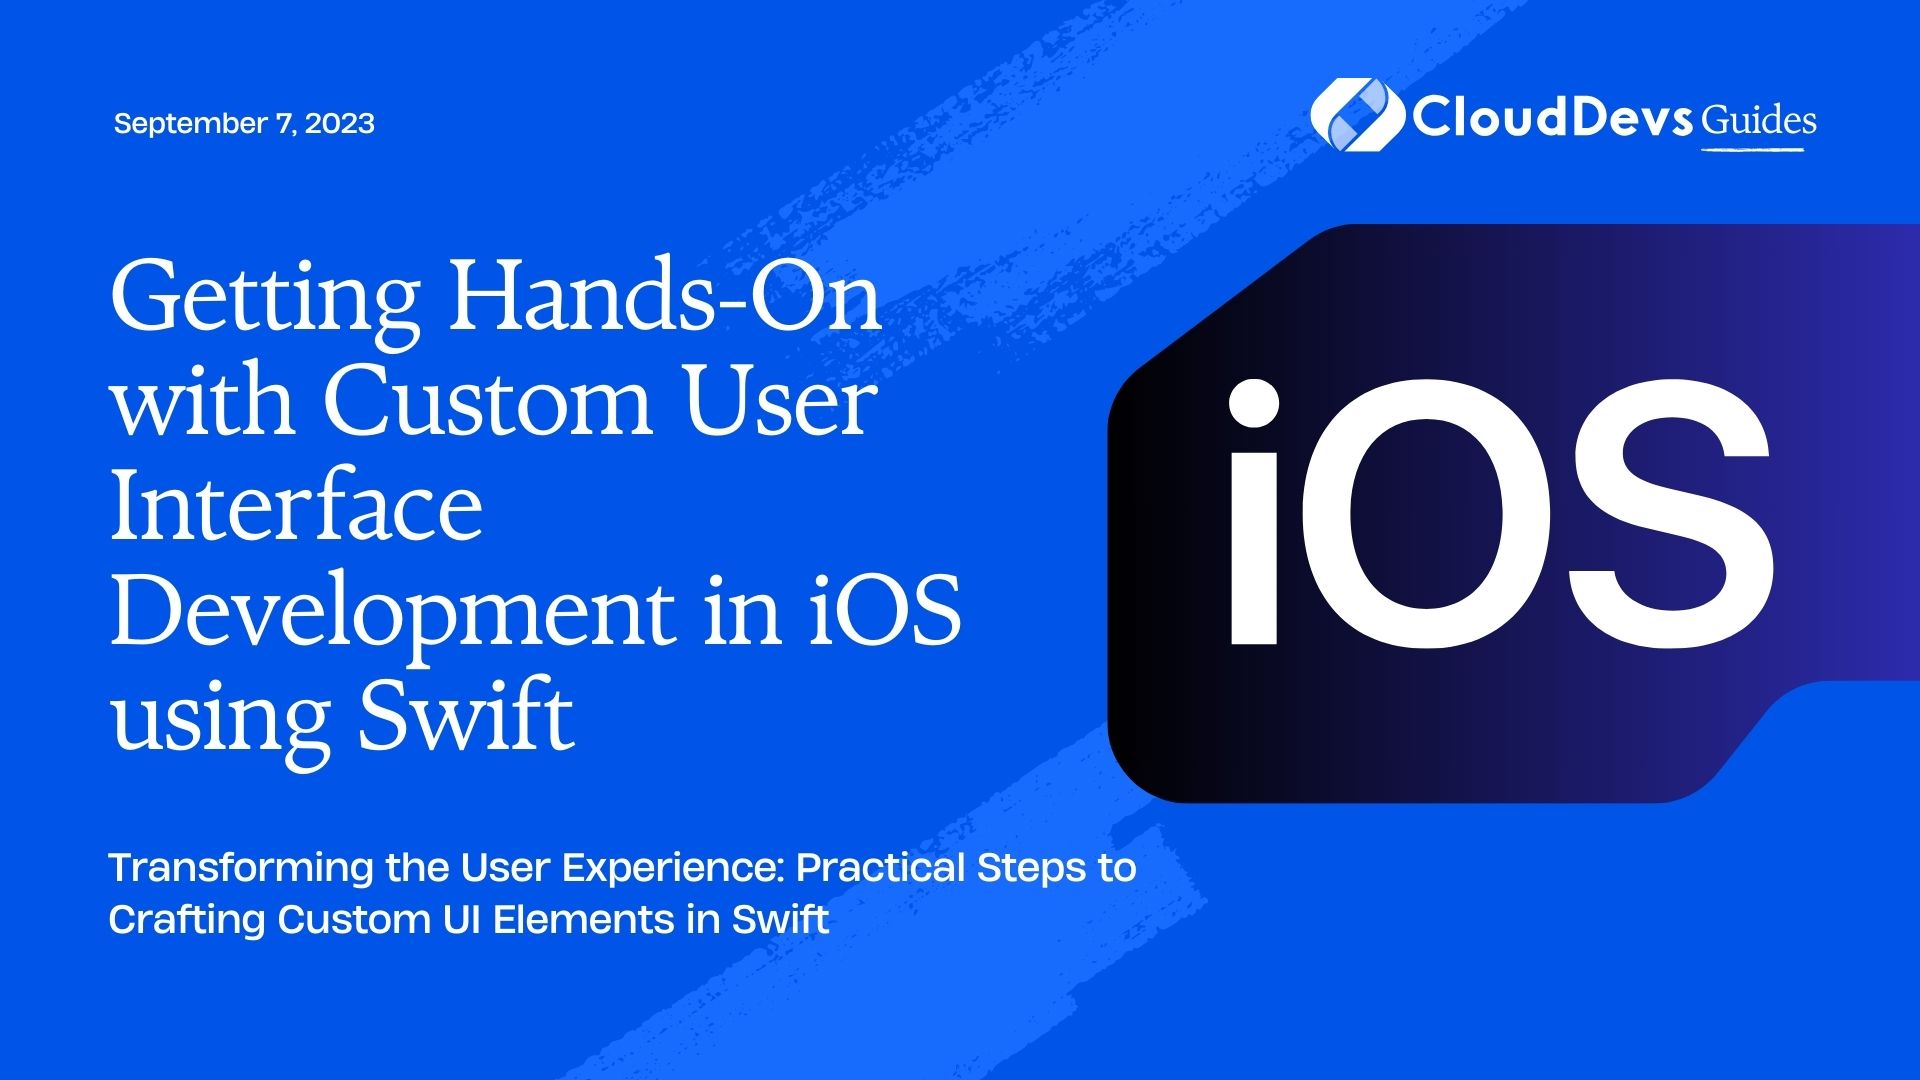 Getting Hands-On with Custom User Interface Development in iOS using Swift